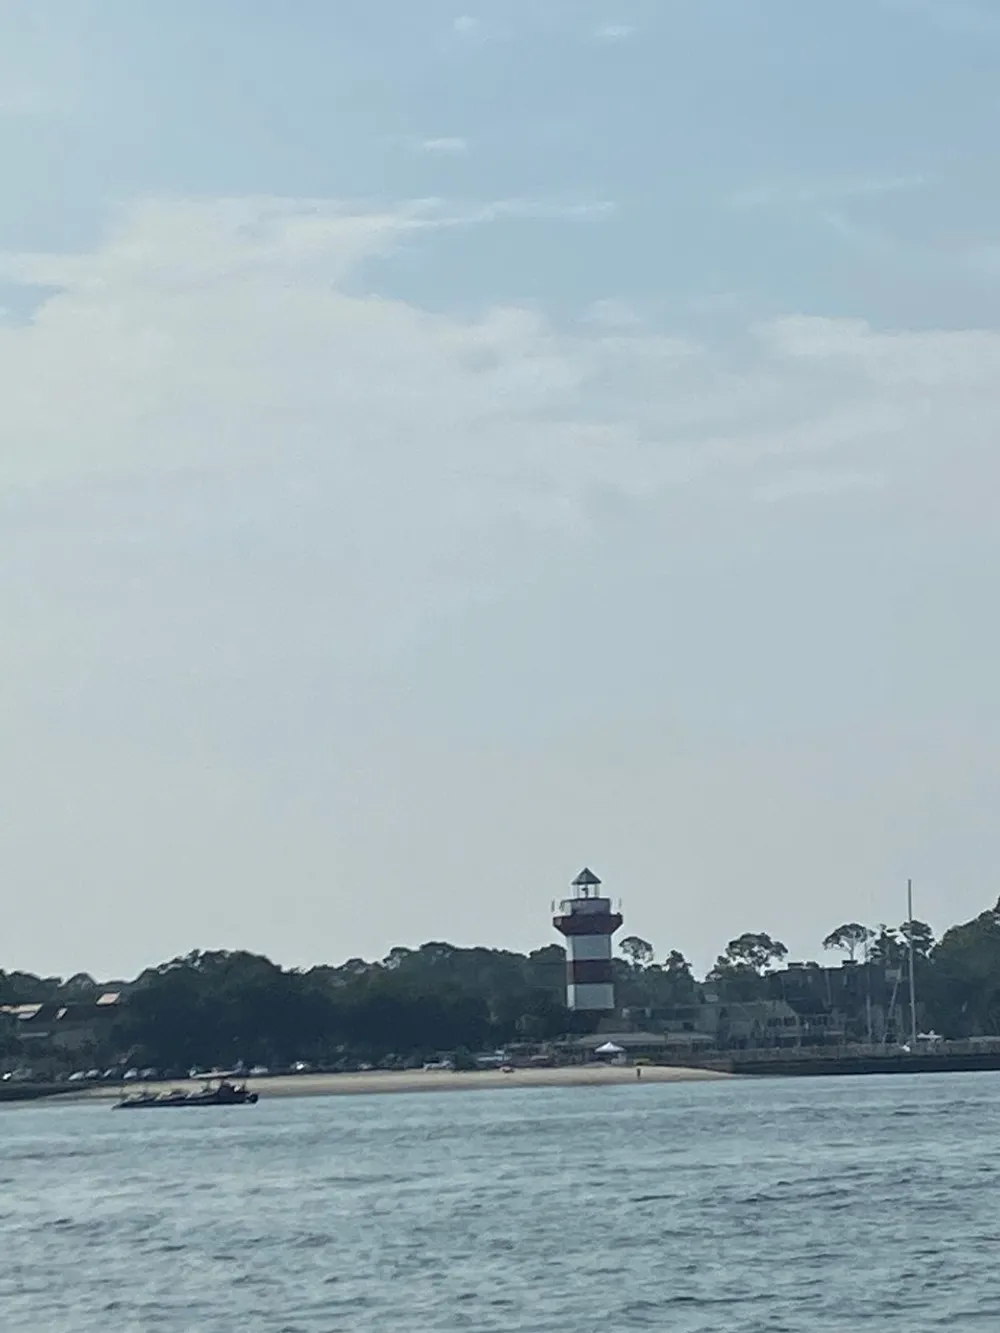 The image shows a red and white lighthouse overlooking a calm body of water with a boat nearby and a backdrop of trees and a blue sky peppered with clouds